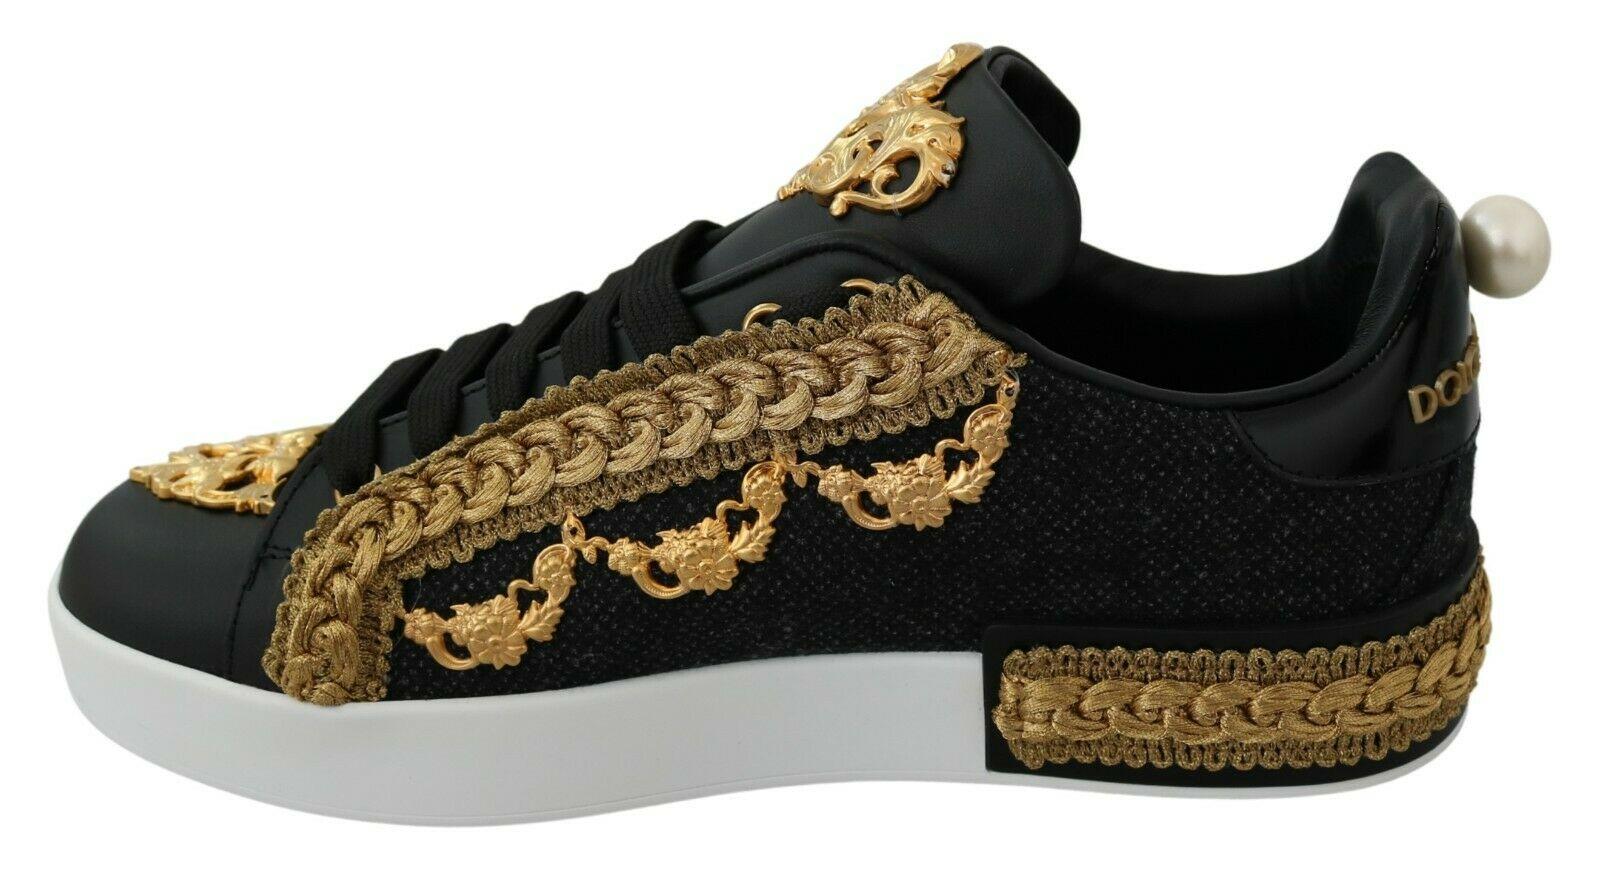 Gorgeous, brand new with tags 100% Authentic Dolce & Gabbana sneakers.

Modell: Sneakers
Color: Gray and black and gold
Material: 40% WV Wool, 60% Leather
Sole: Rubber
Gold baroque detailing
Logo details
Made in Italy


Size: EU38 / UK 5.5 / US